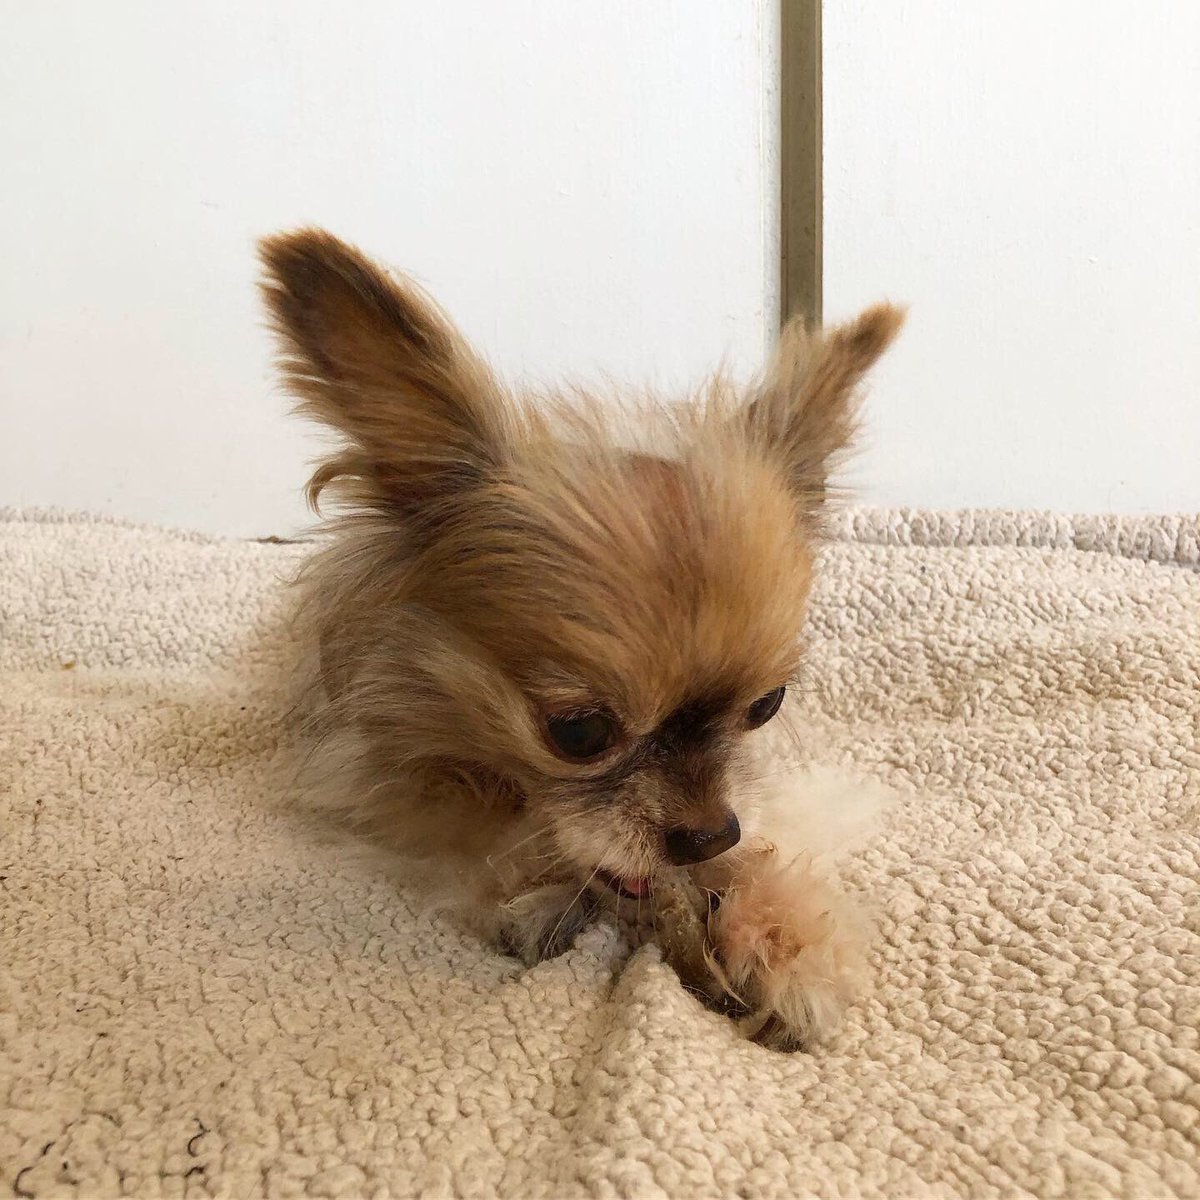 Using this last long weekend before the holidays to charge up for another busy week! Between cleaning, laundry and shopping, we use Dr. Lyon's dental dog treats from @Chewy so Chewie’s dental care doesn’t slip to the sidelines.
#ChewyPartner #ChewyBeyondTheBusy